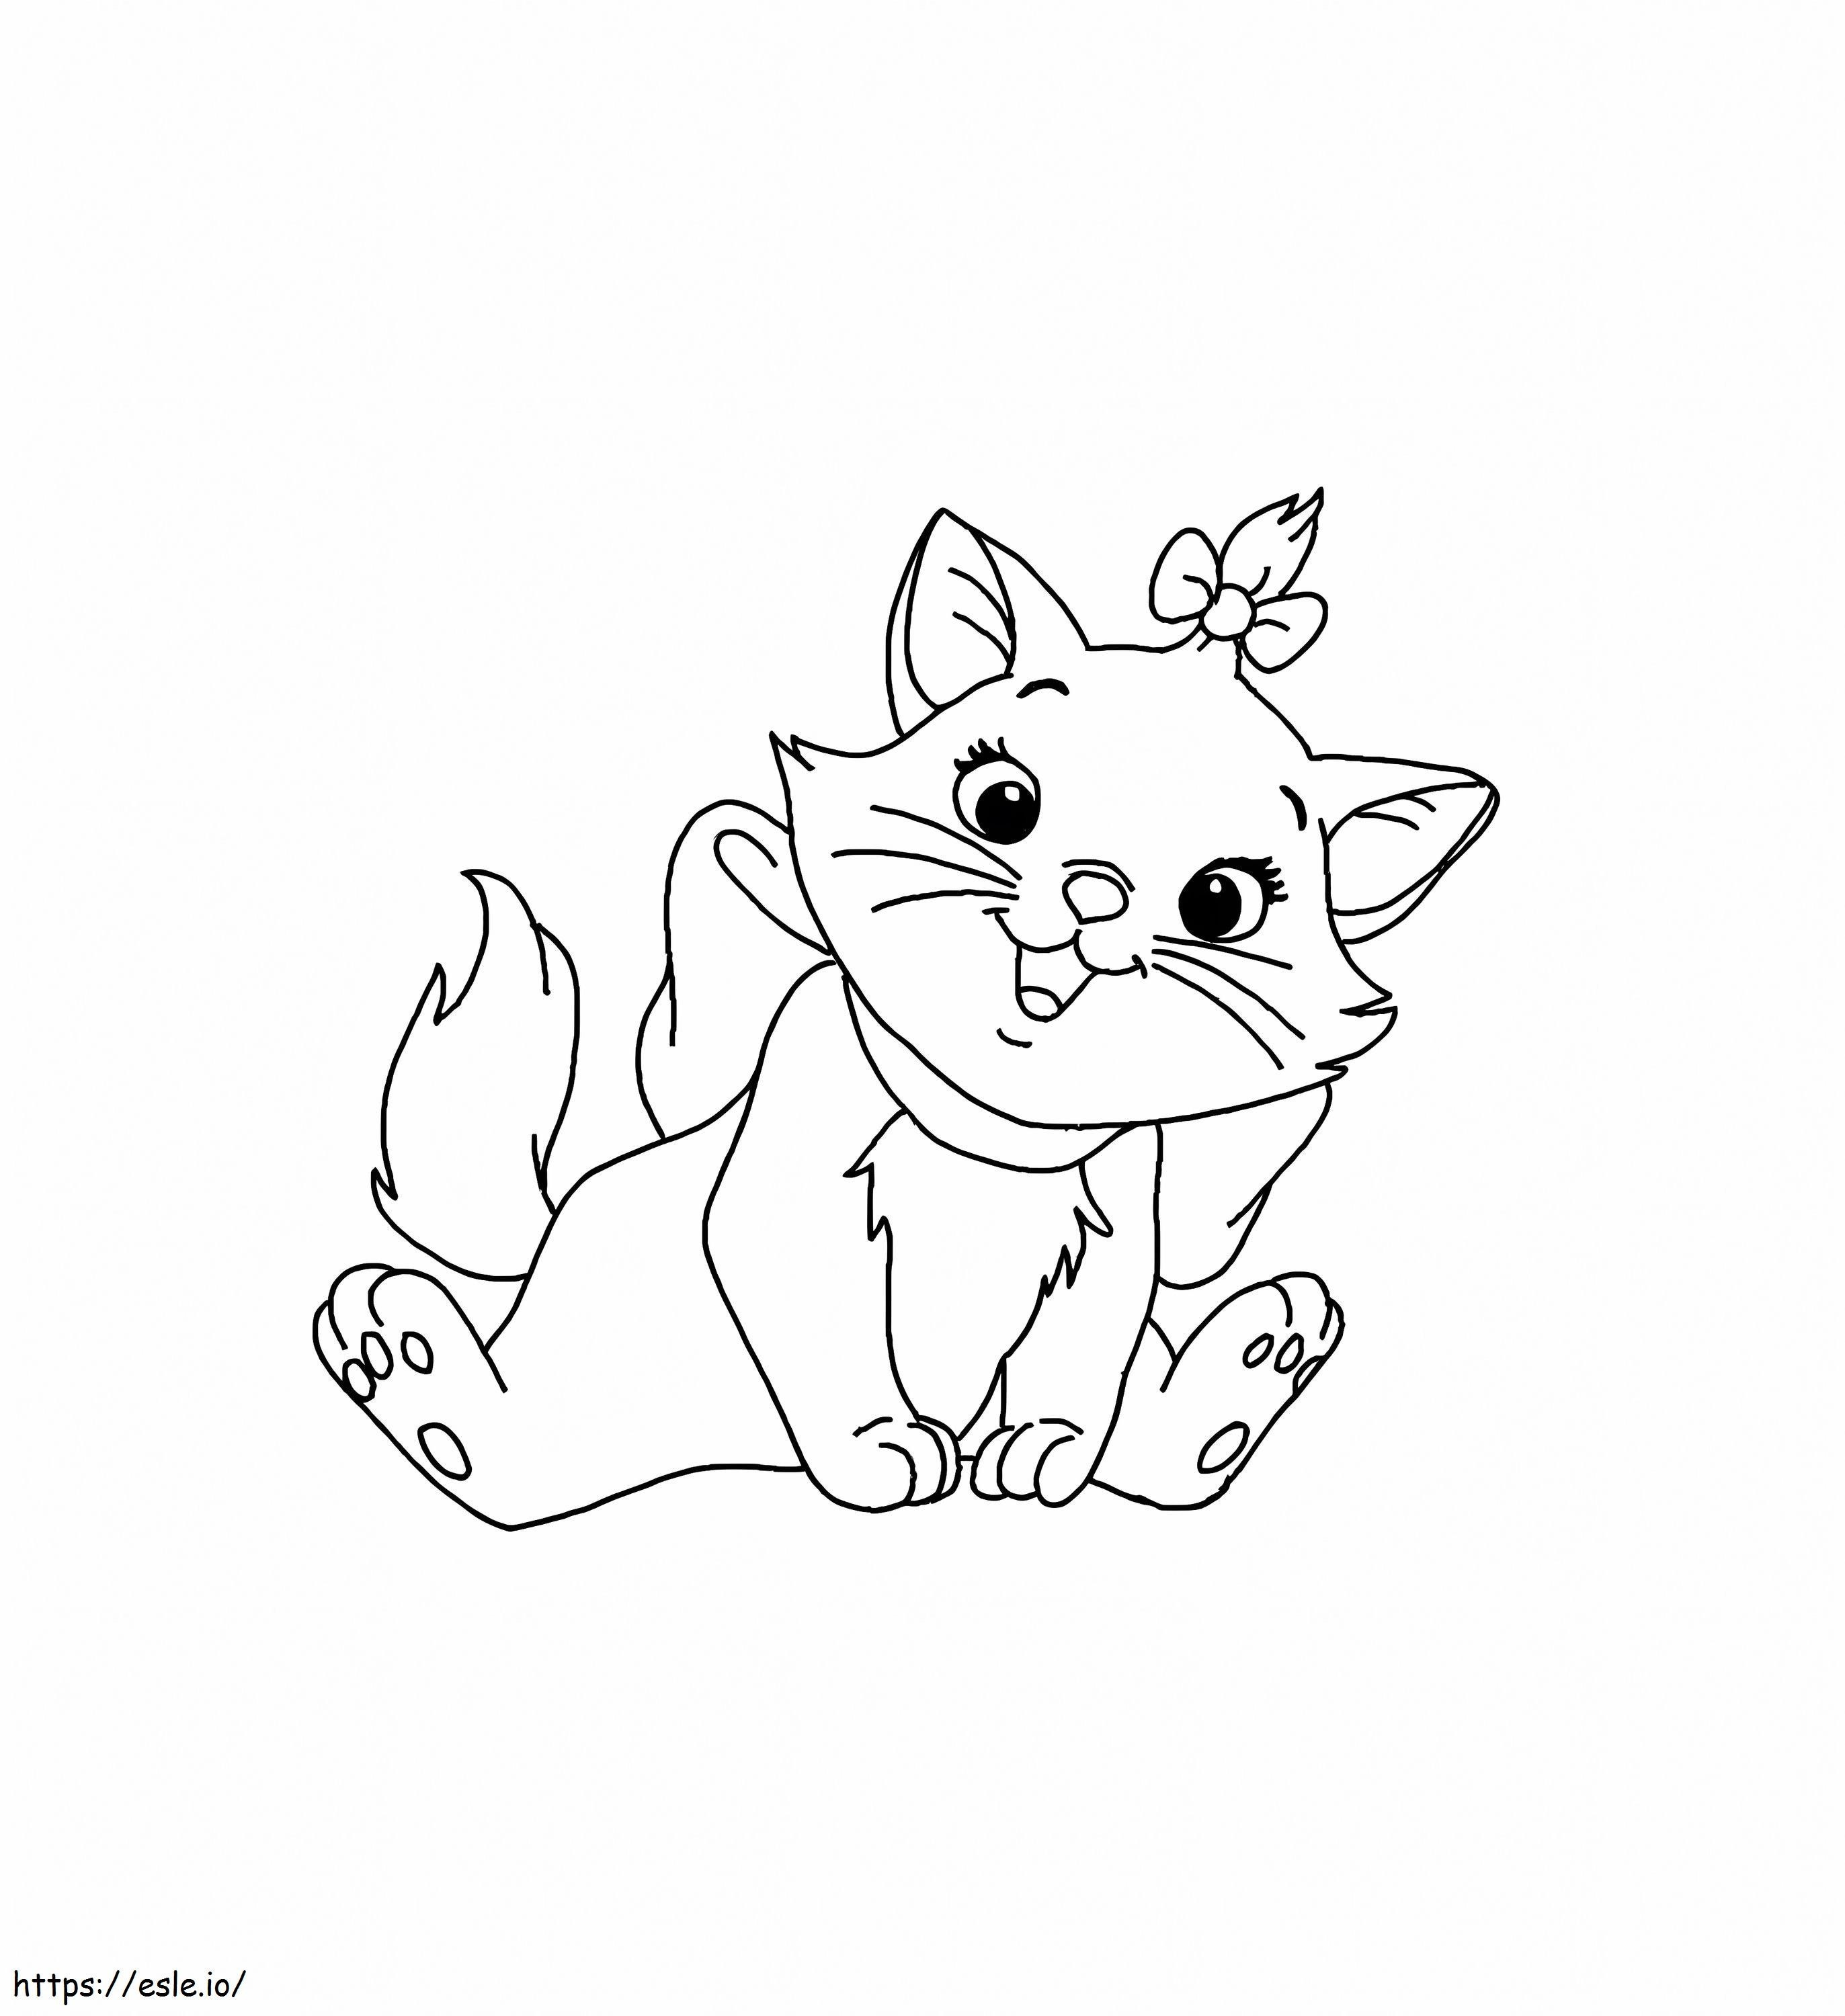 Print Cute Image Of Marie Cat For Coloring coloring page